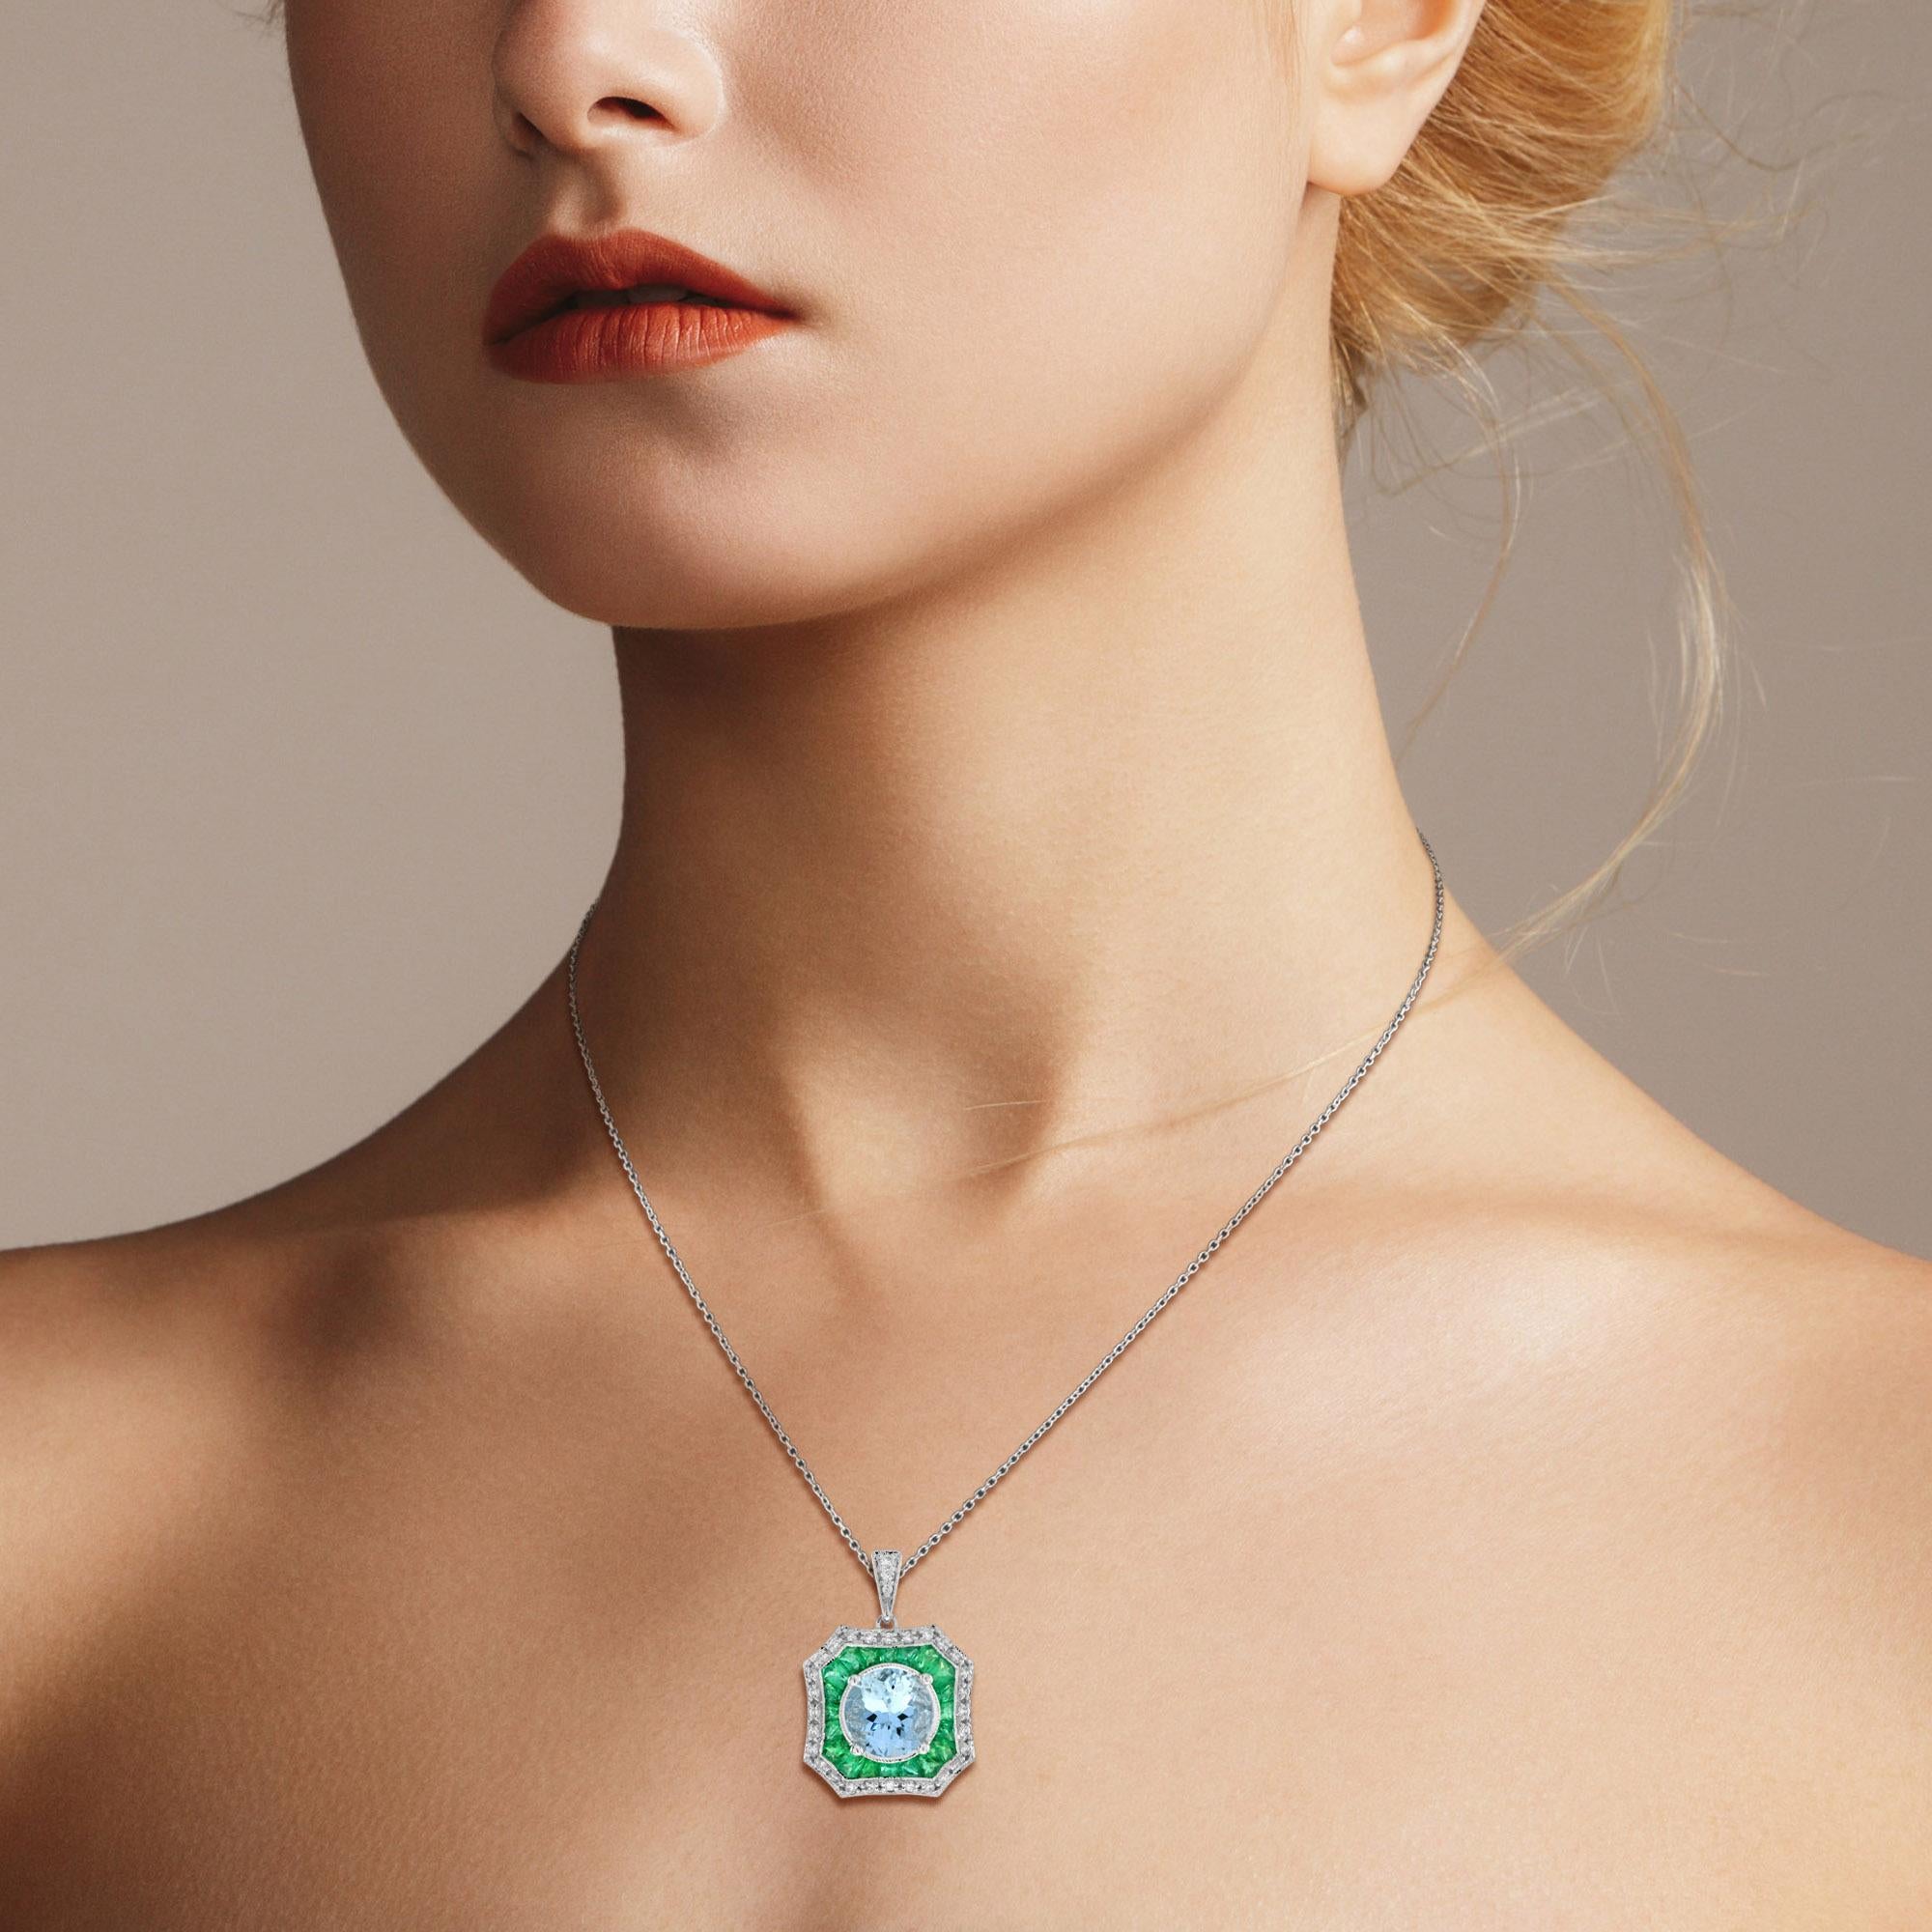 This elegant pendant is centrally set with a sparkly 8 carat aquamarine which is milgrain set. The aquamarine is then surrounded by a target of French cut vibrant green emeralds and glittering diamonds, similarly finished with a milgrain edges. The